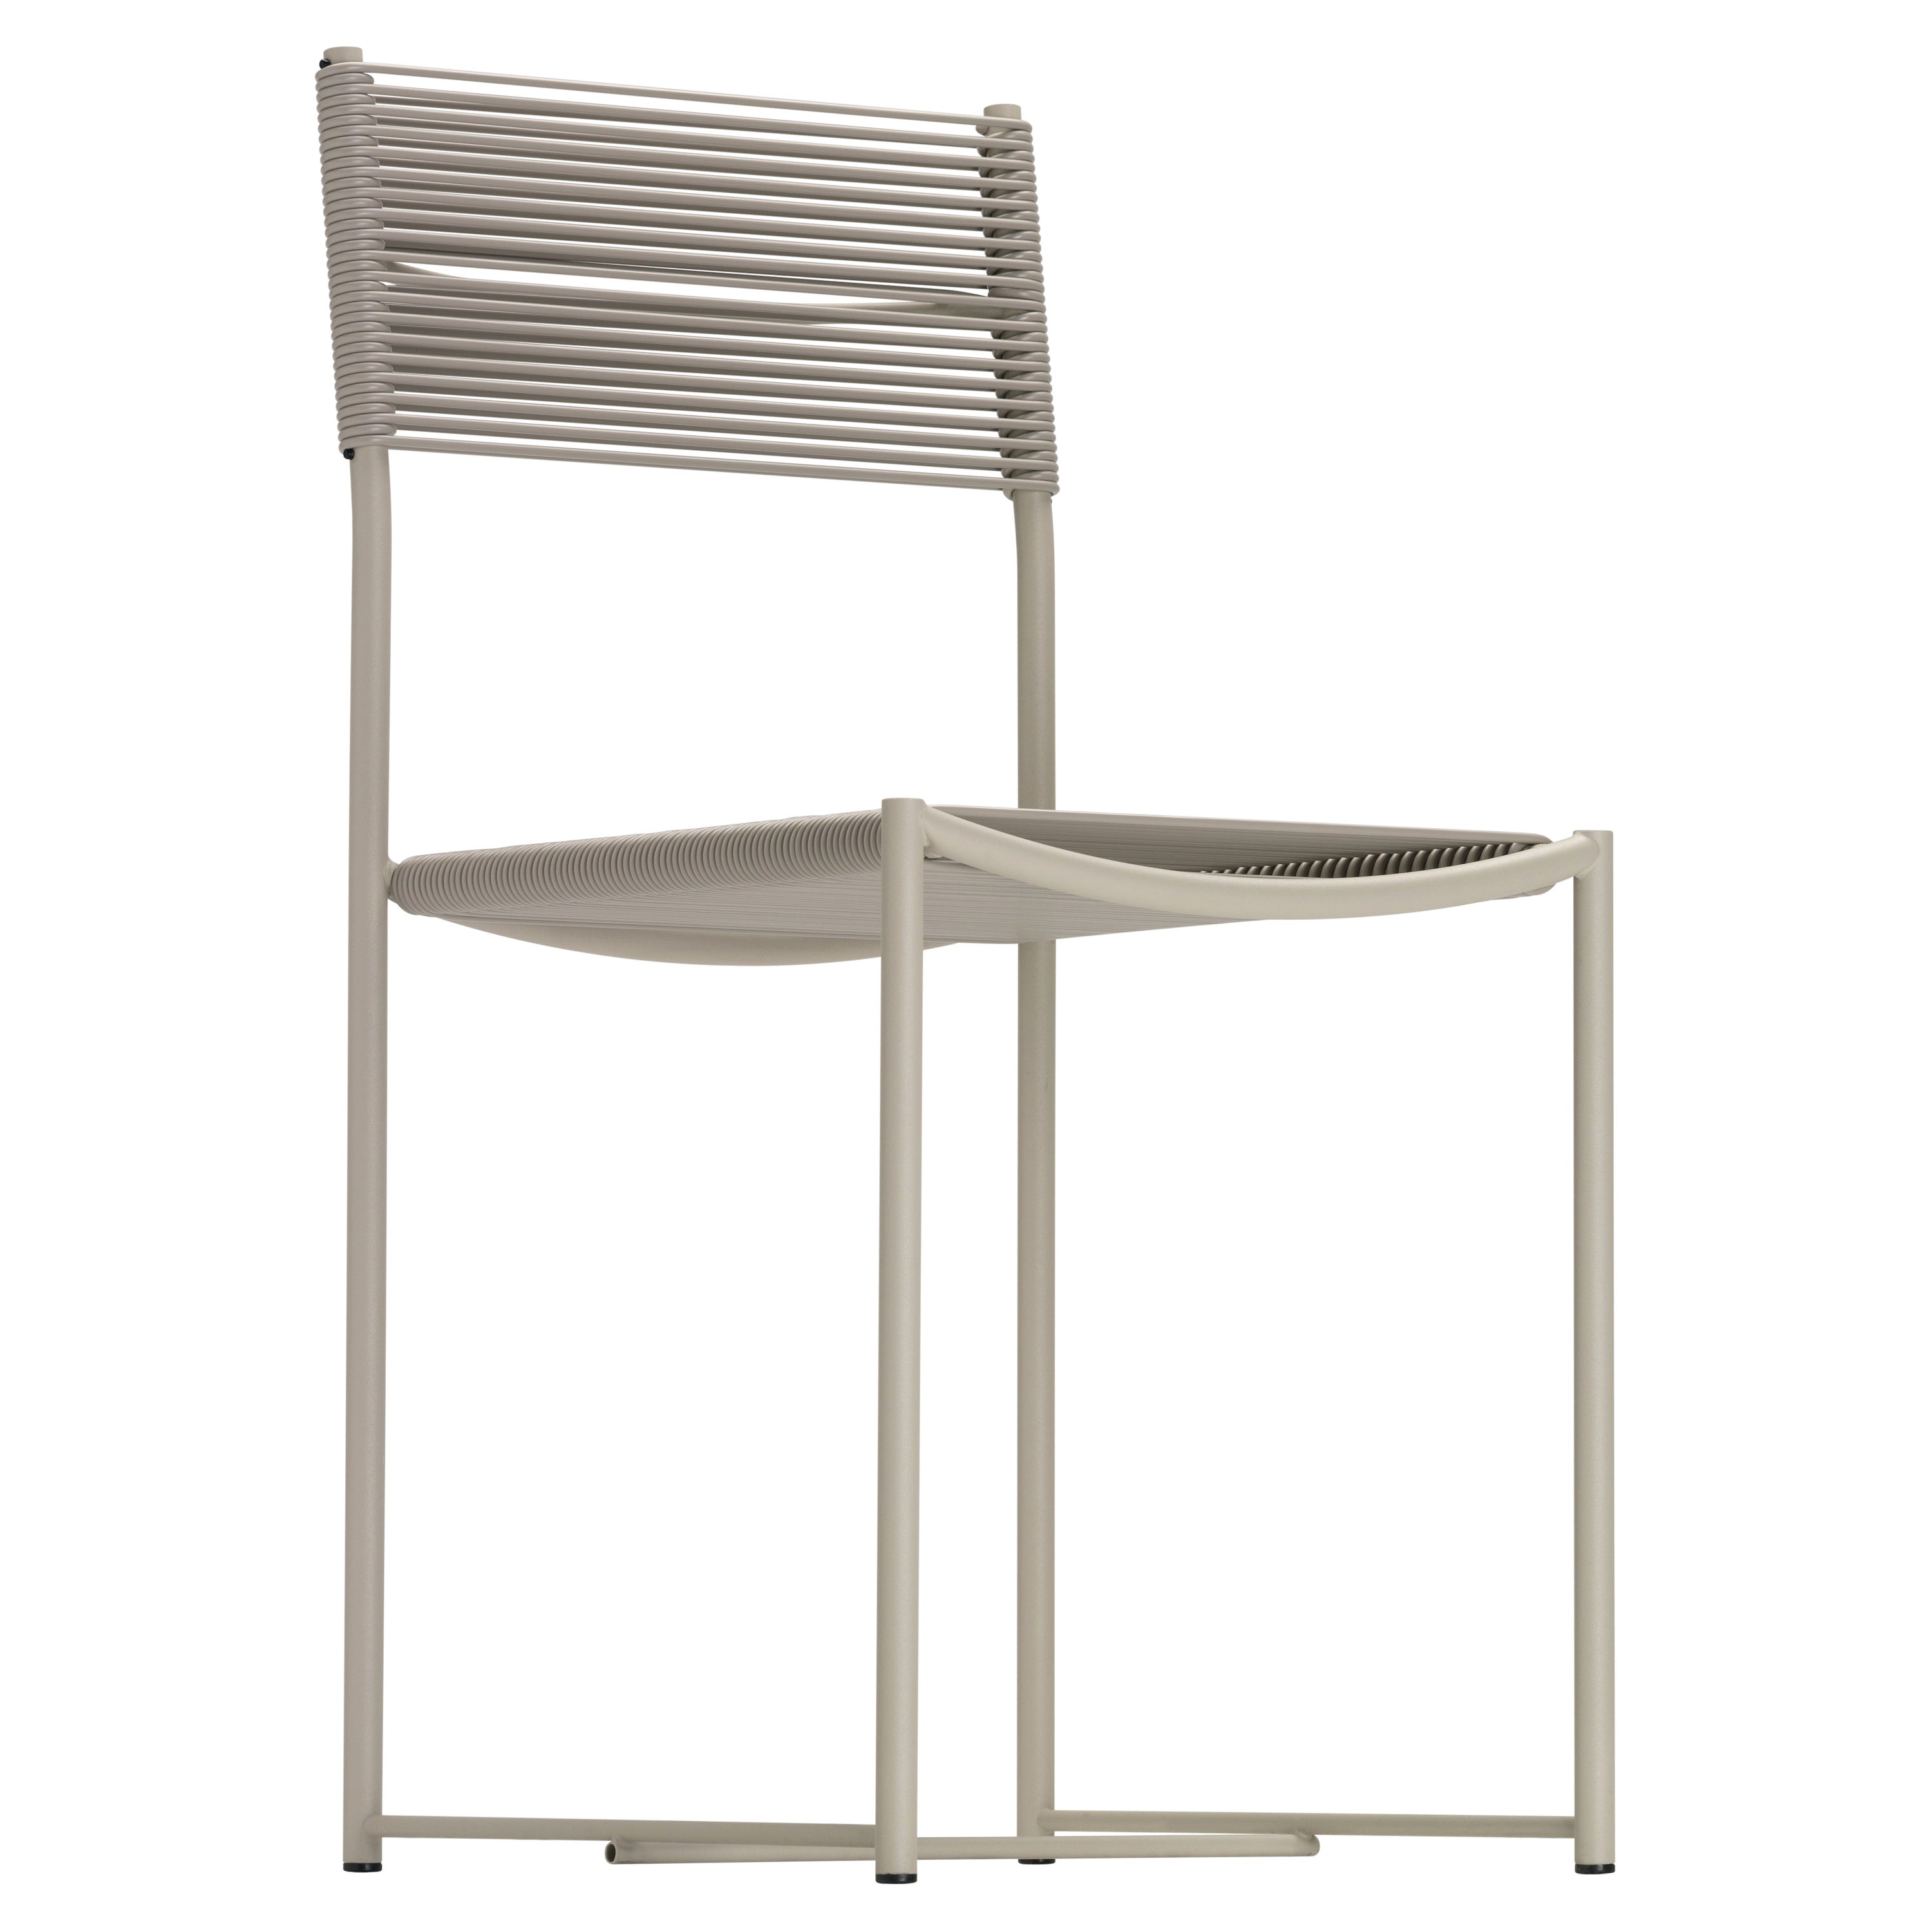 Alias 101 Spaghetti Chair with Beige PVC Seat and Sand Lacquered Steel Frame For Sale